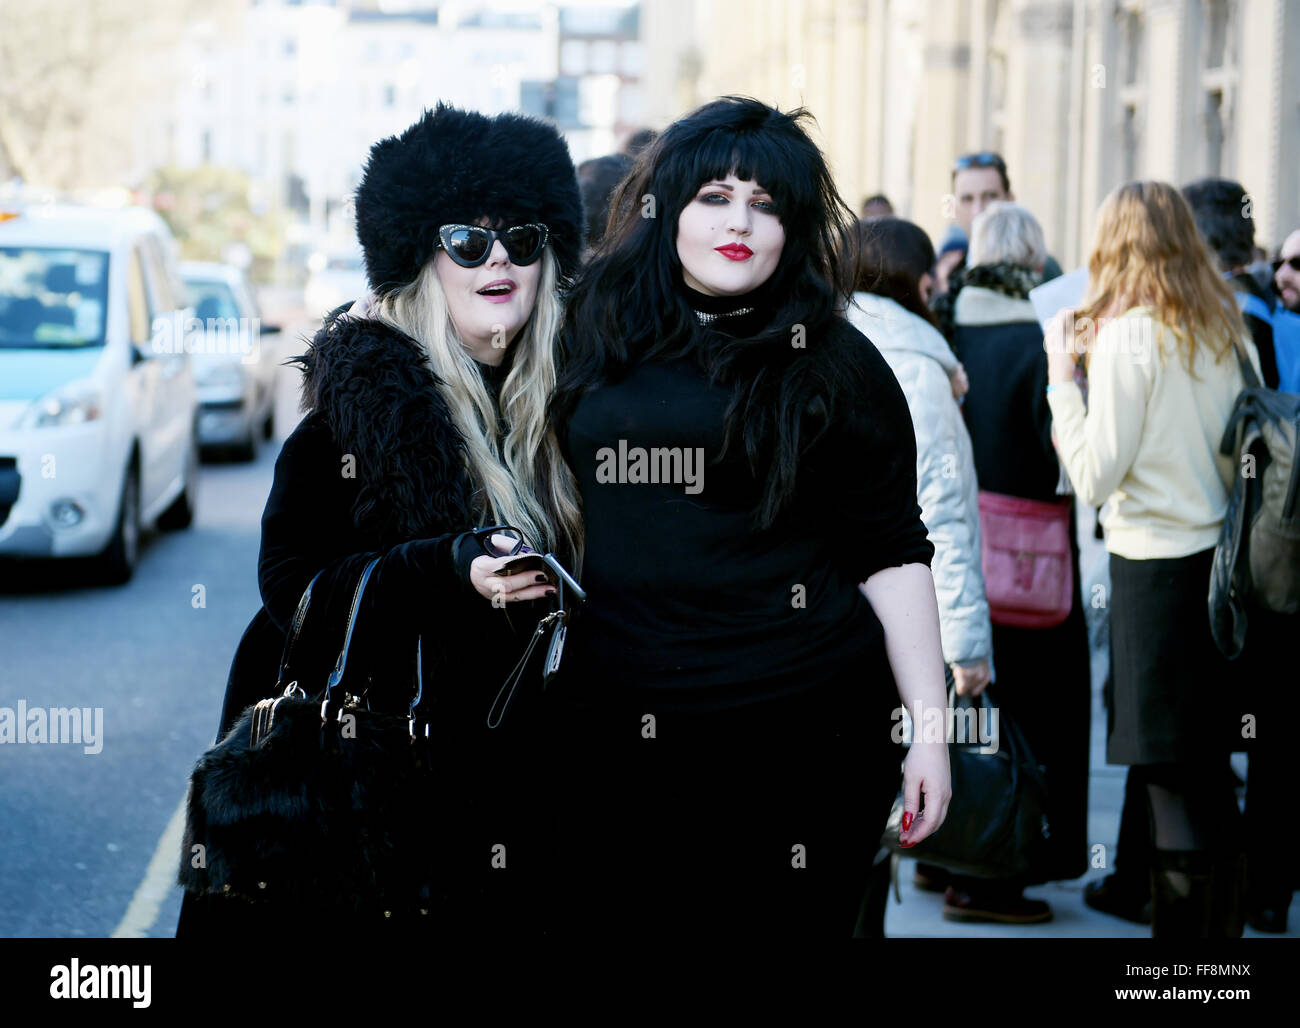 Brighton, UK. 11th February, 2016. This couple of fashionable ladies are dressed to stay warm as the weather turns colder in Brighton today as they attended the University of Brighton Graduation Ceremony held in The Dome . The forecast is for colder weather to spread across Britain with snow predicted for next week  Credit:  Simon Dack/Alamy Live News Stock Photo